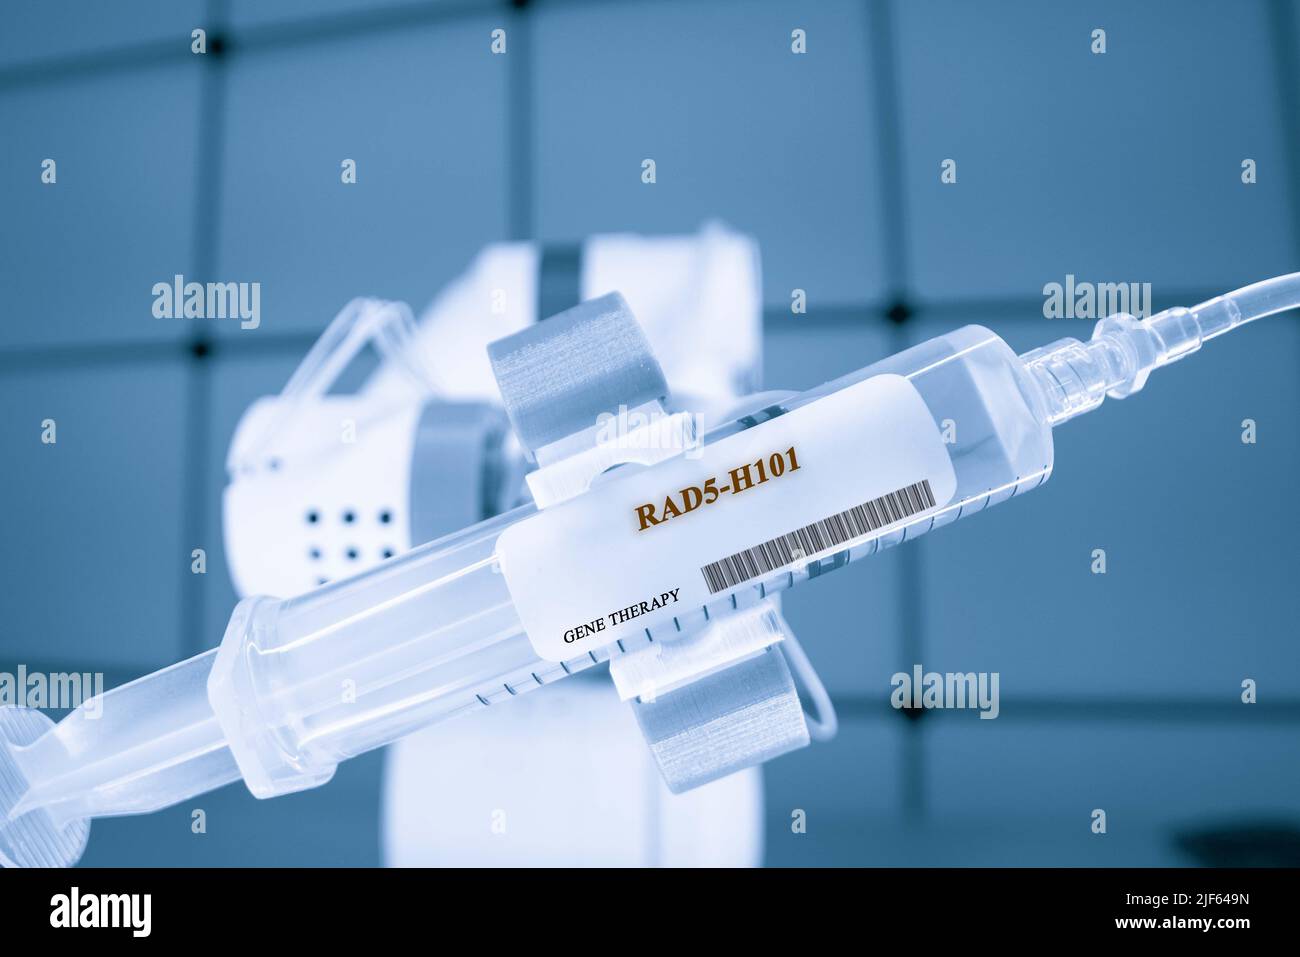 rAd5-H101 Personalized gene therapy. Syringe and injection of stem cells in robot arm Stock Photo